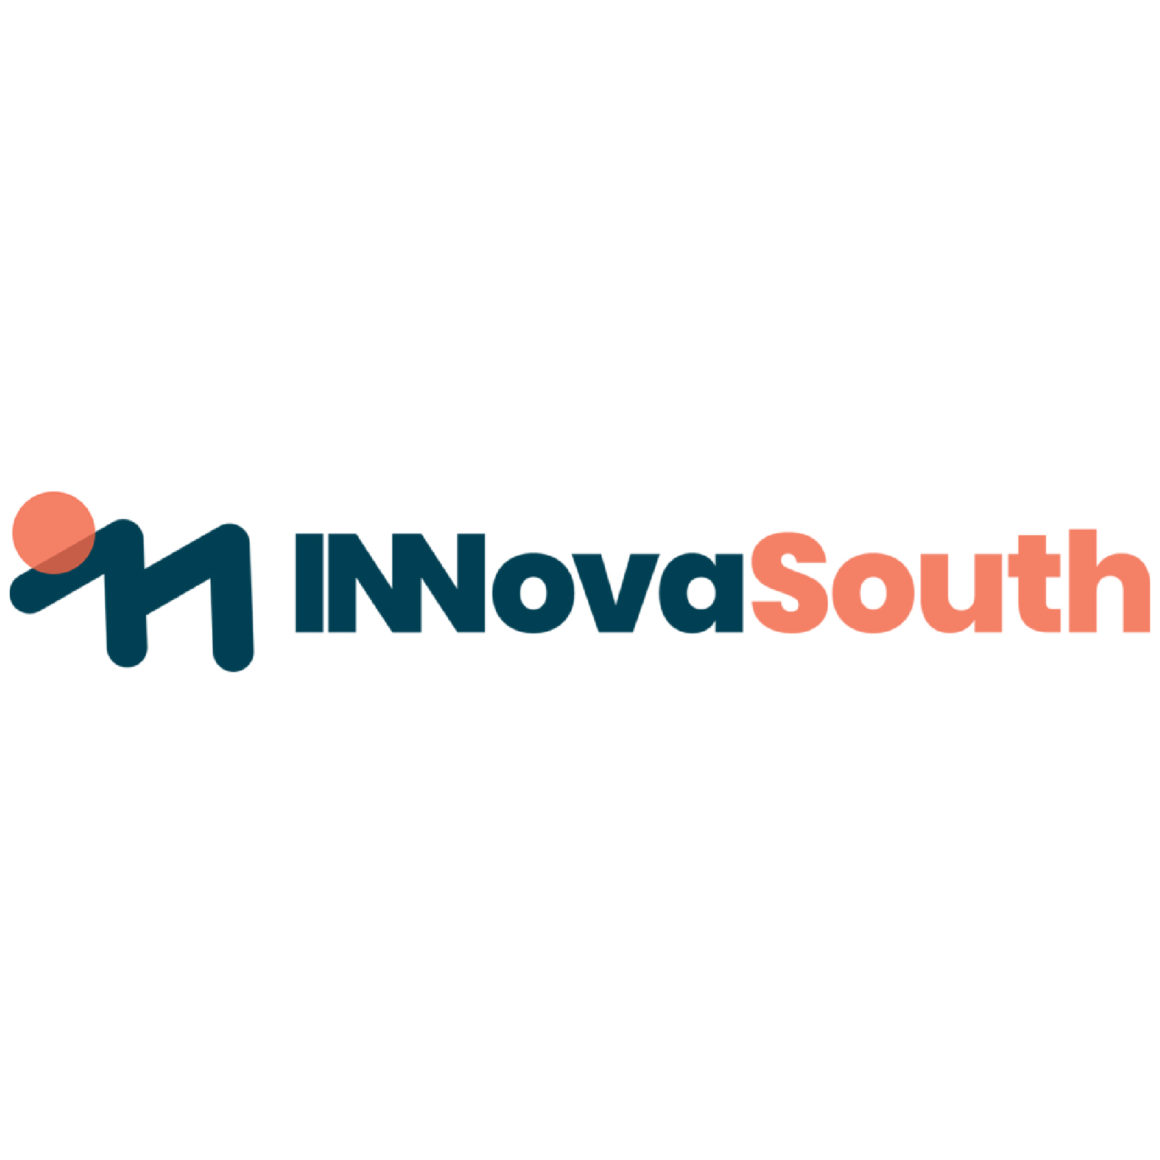 VSR was awarded a voucher from INNovaSouth for the implementation of new organisational models and innovative solutions to support the valorization of human resources in the workplace. The iNNovaSouth project is co‐funded by the Horizon 2020 Research and Innovation Program.